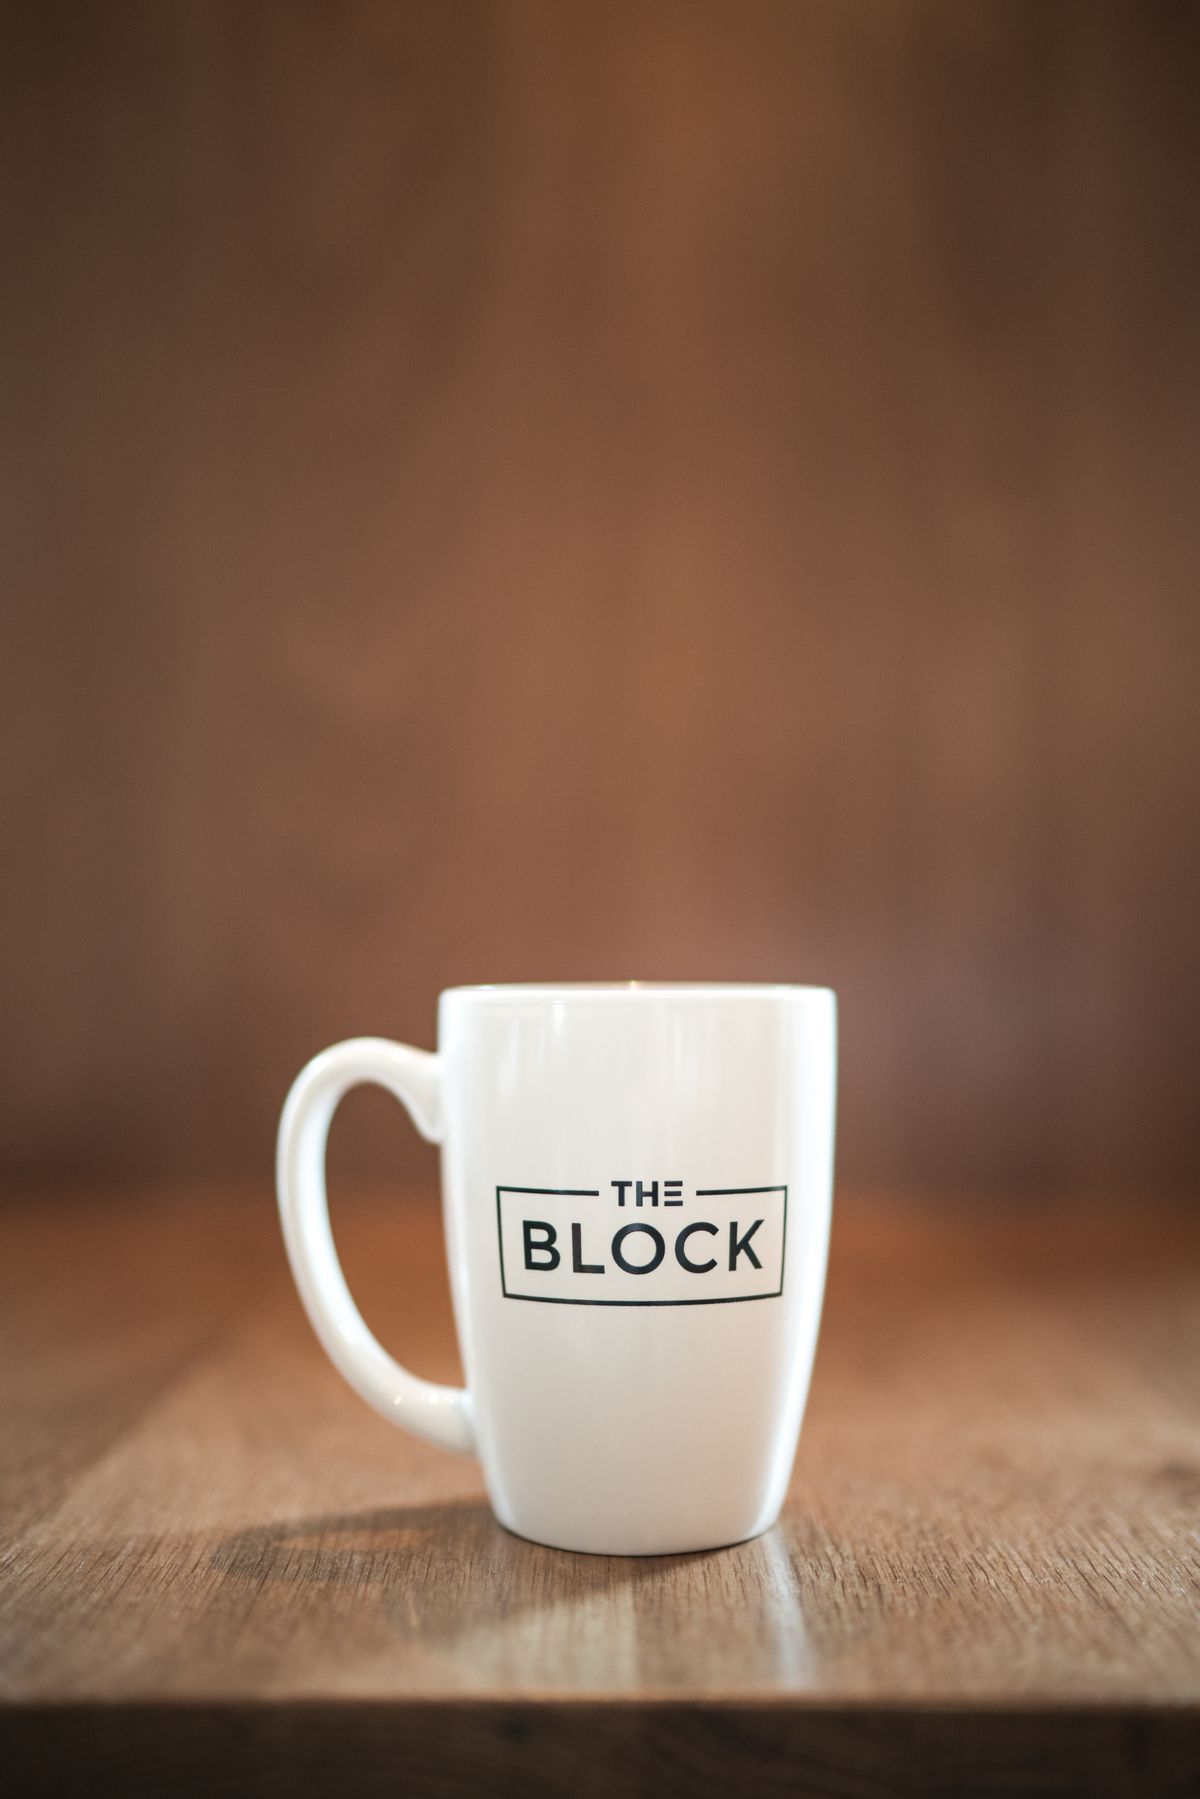 A white mug on a wooden countertop, with the logo of the restaurant “The Block” on it.